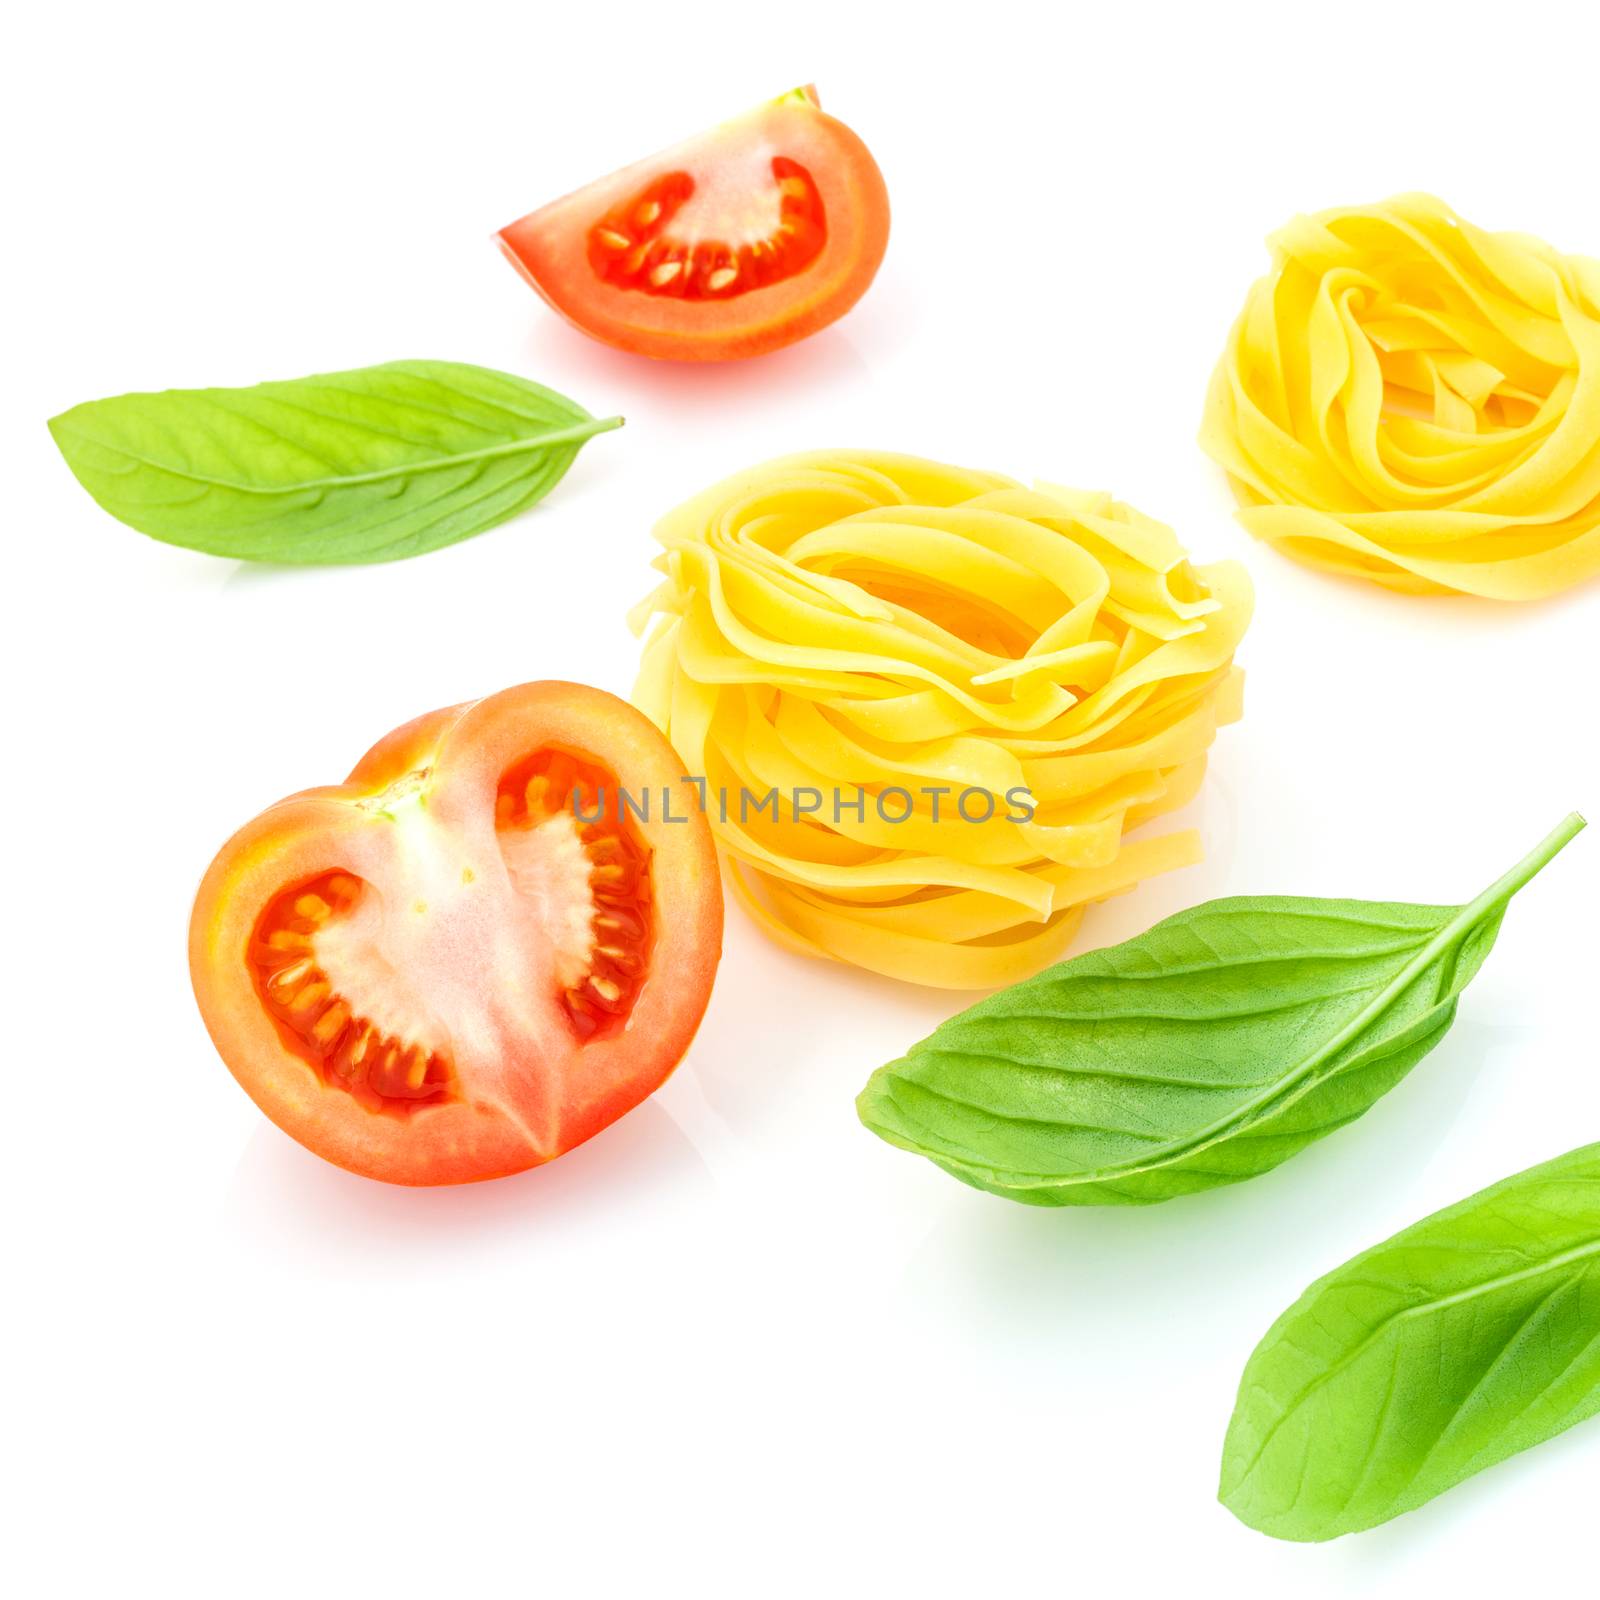 Italian food concept Fettuccine with tomato and sweet basil isolate on white background.
Fettuccine and ingradients with copy space.